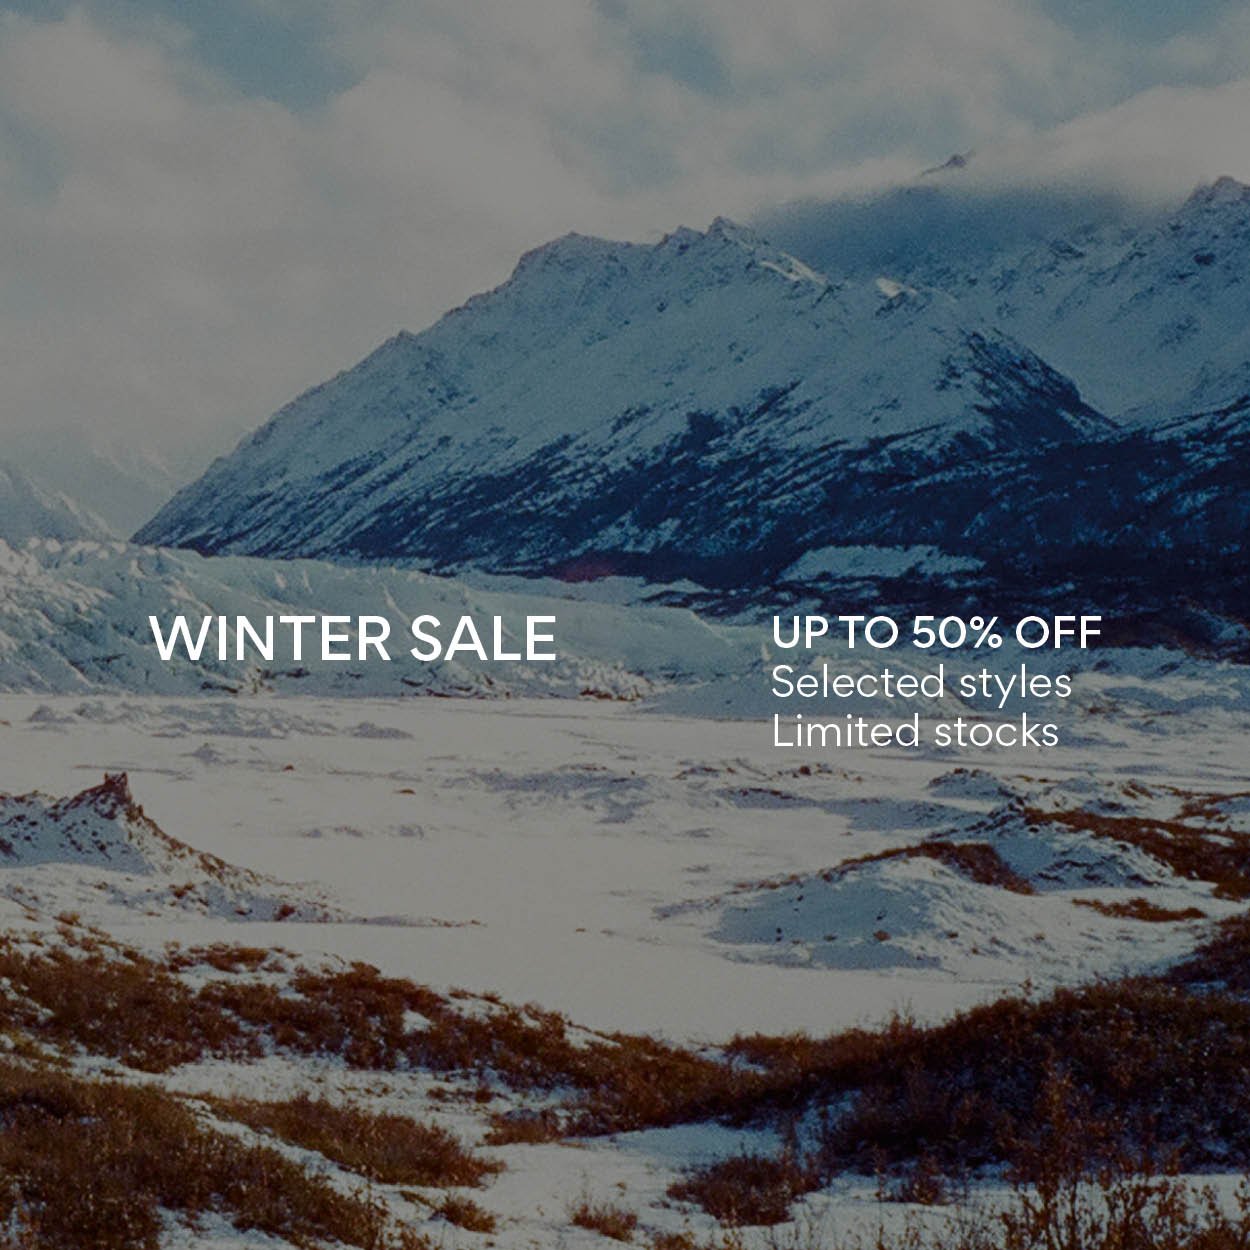 Winter Sale. Up to 50% off. Selected styles. Limited stocks.